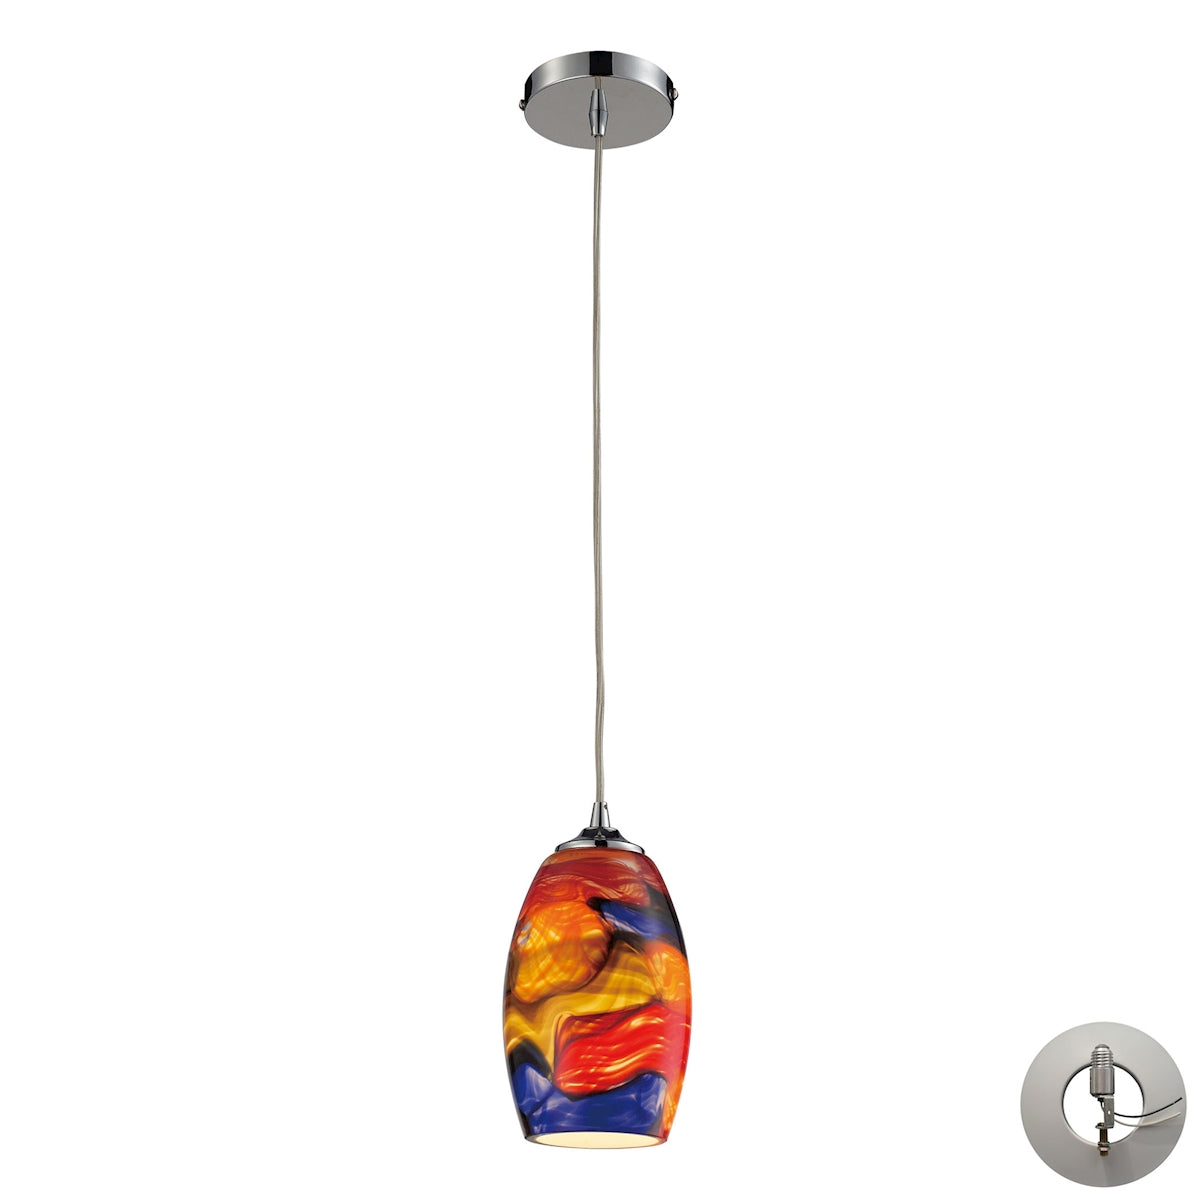 ELK Lighting 31339/1-LA Surrealist 1-Light Mini Pendant in Polished Chrome with Multi-colored Glass - Includes Adapter Kit